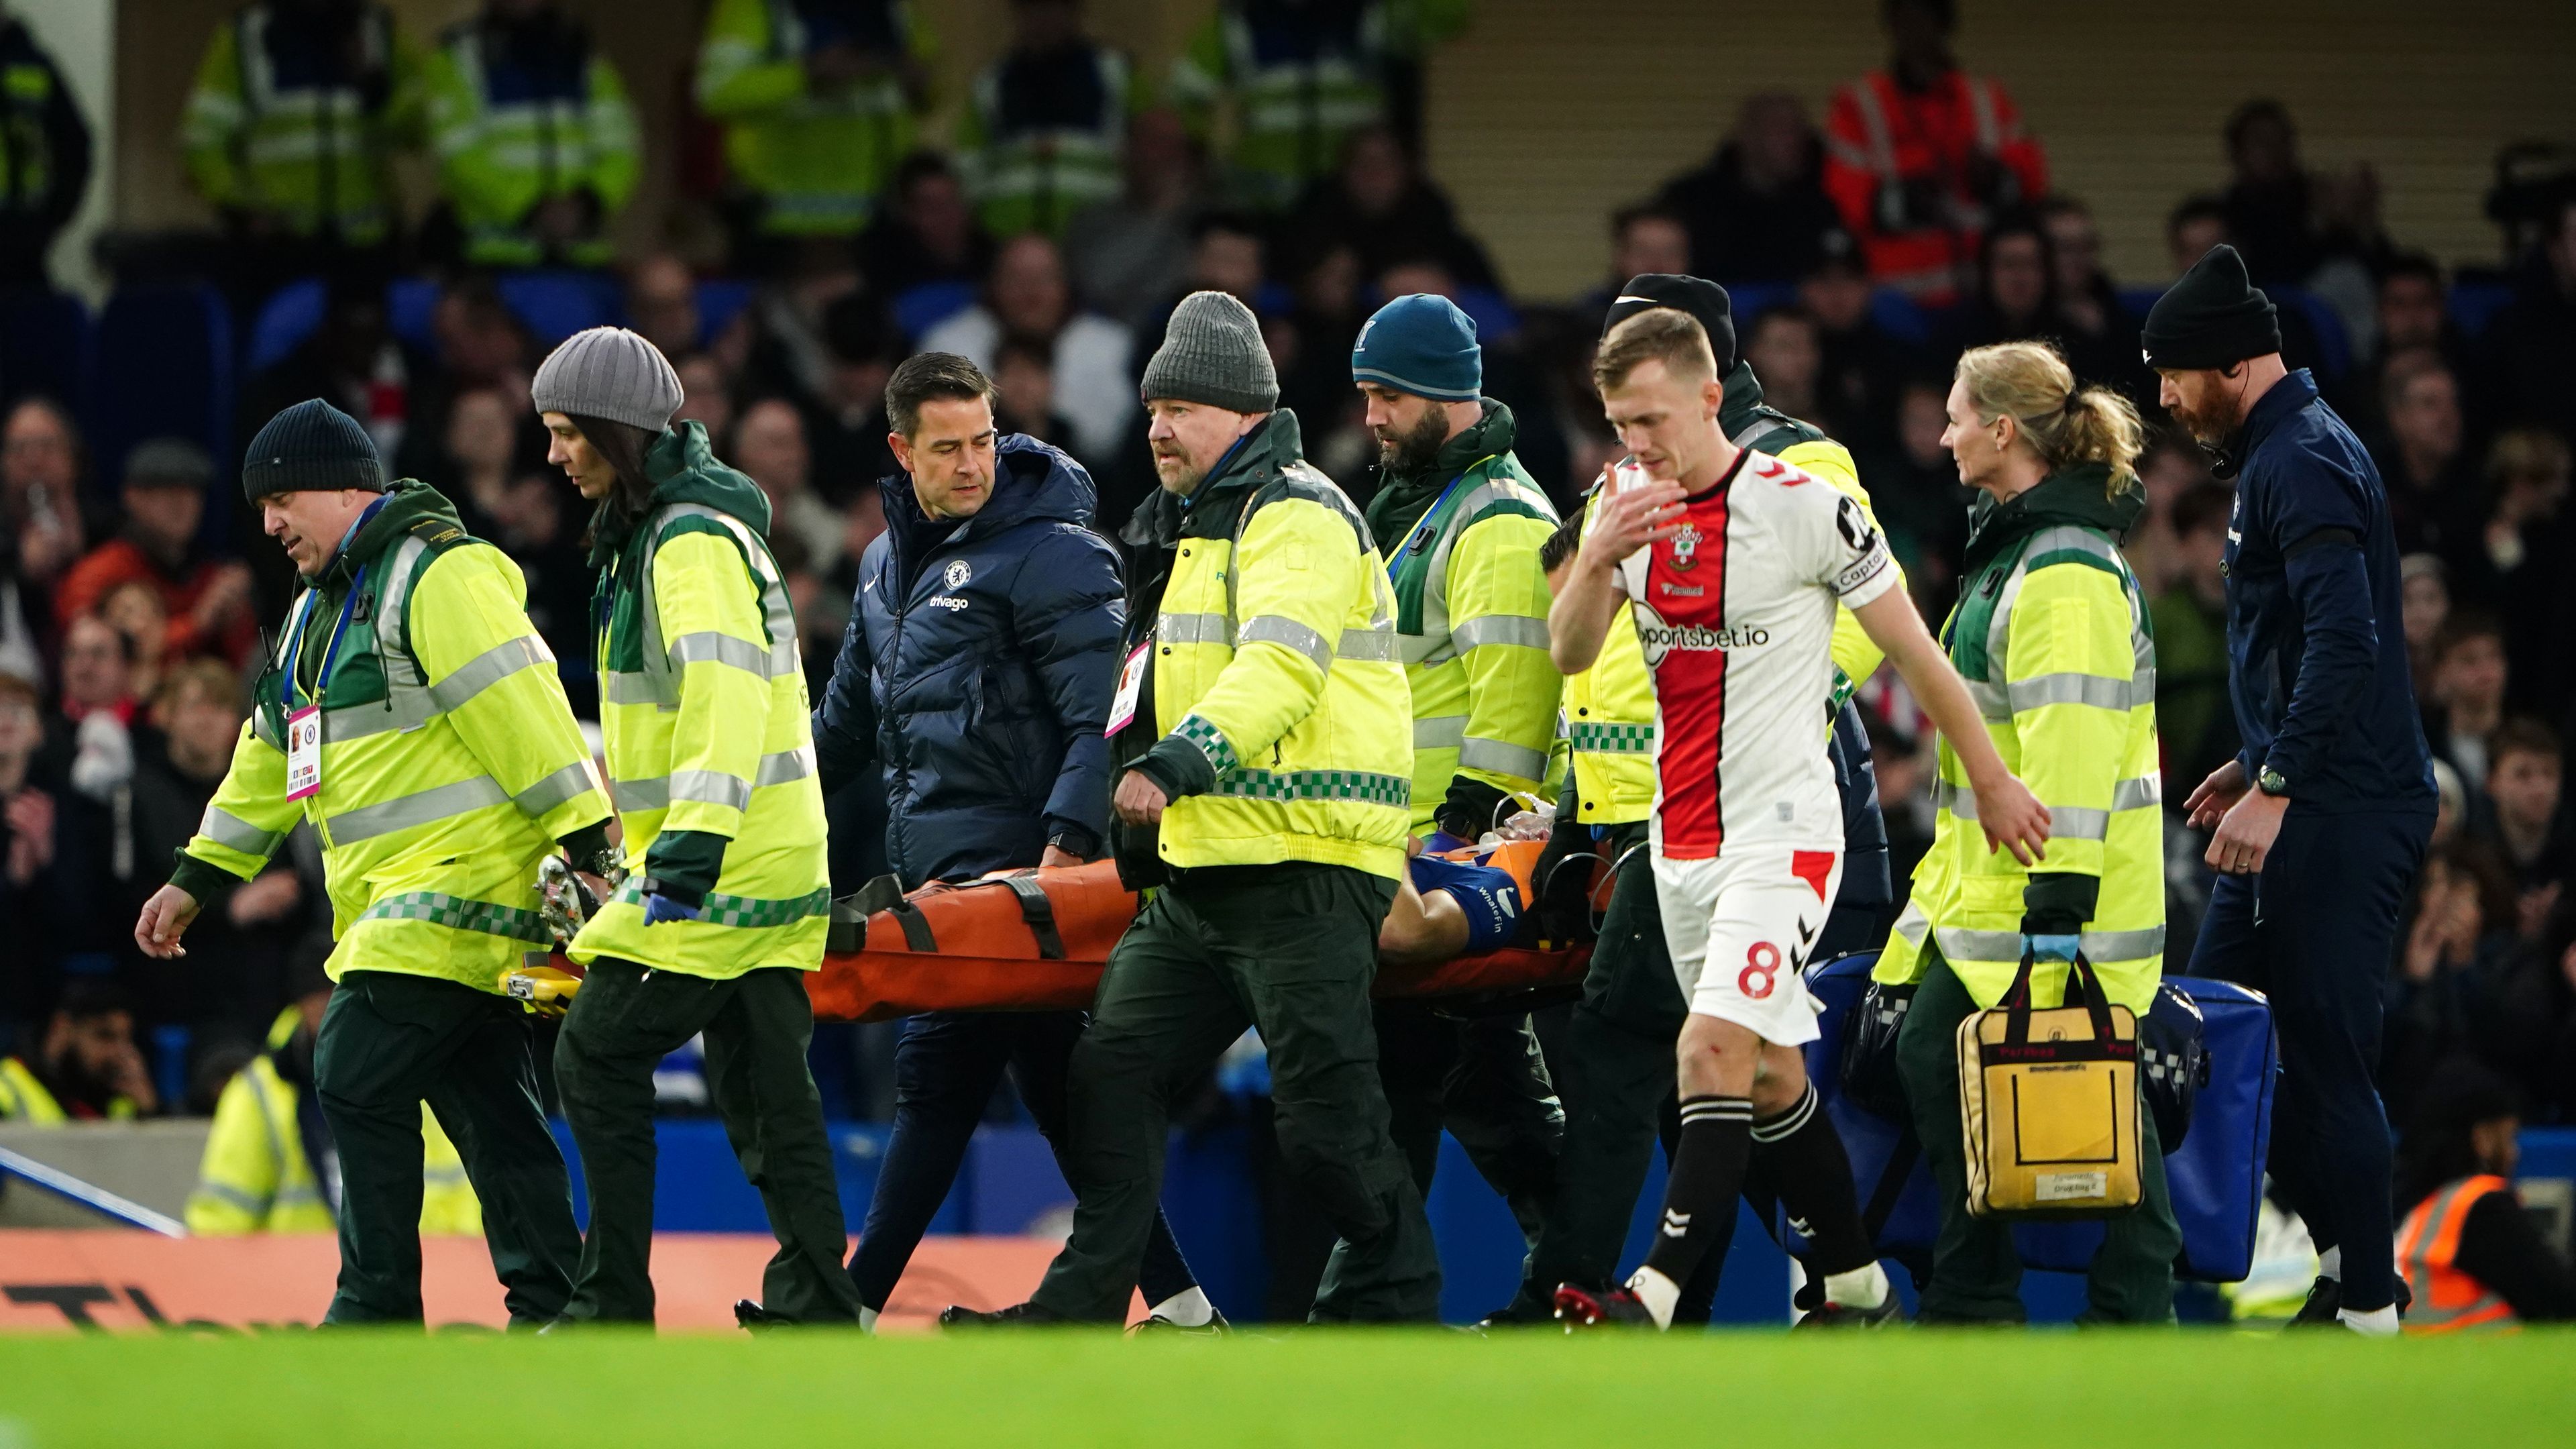 Chelsea captain Cesar Azpilicueta hospitalised after being kicked in the head